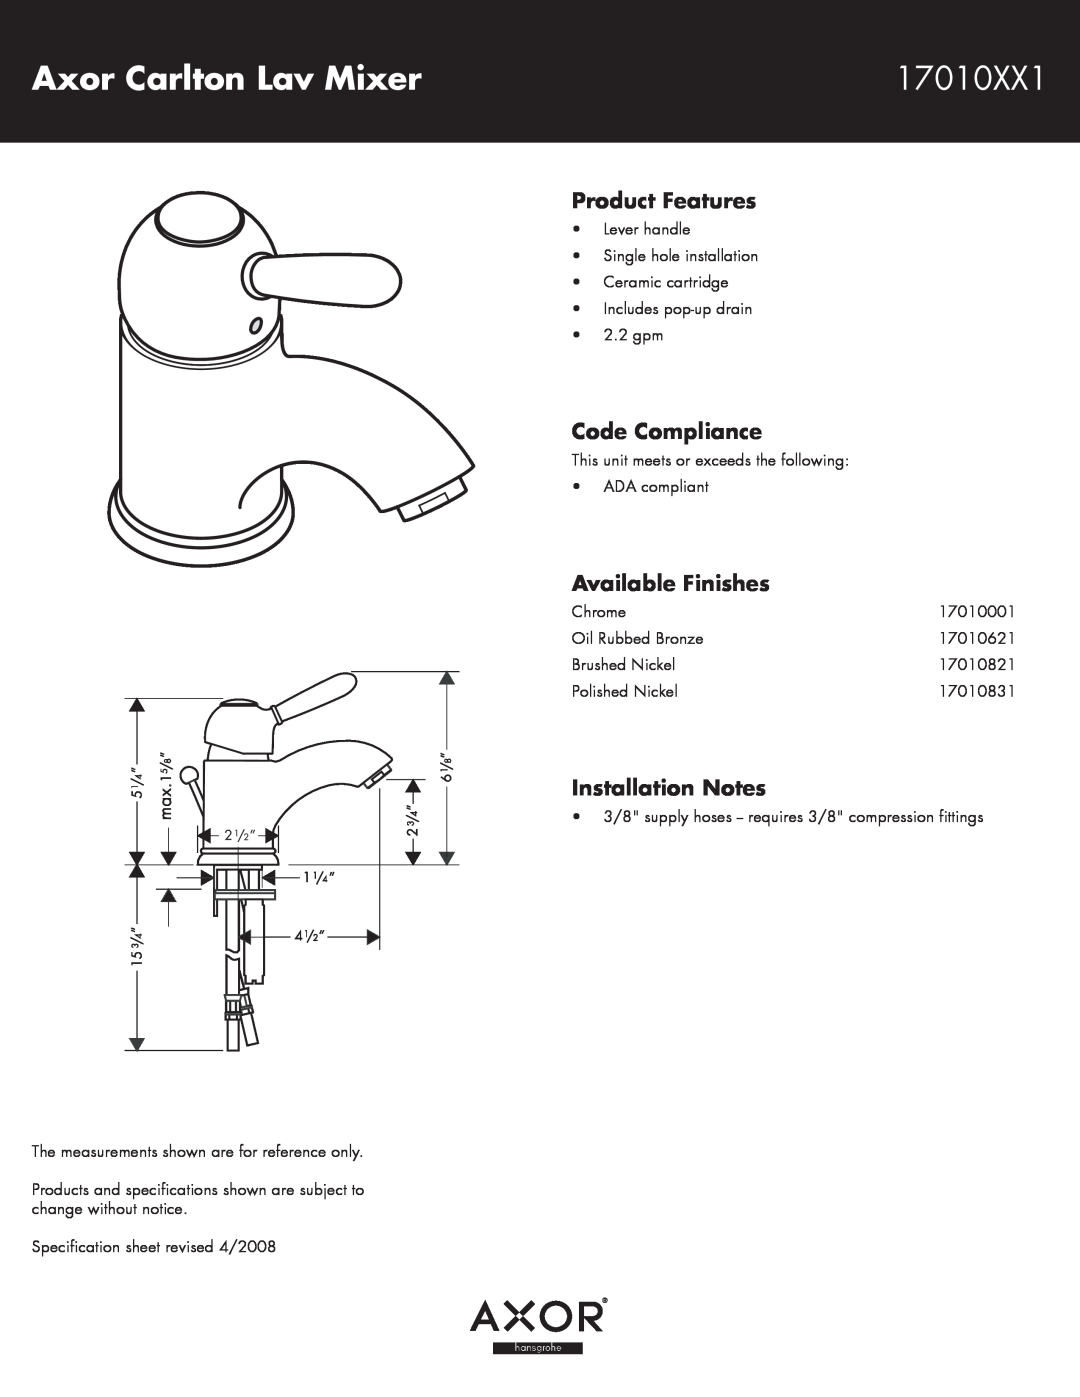 Axor 17010XX1 specifications Axor Carlton Lav Mixer, Product Features, Code Compliance, Available Finishes 